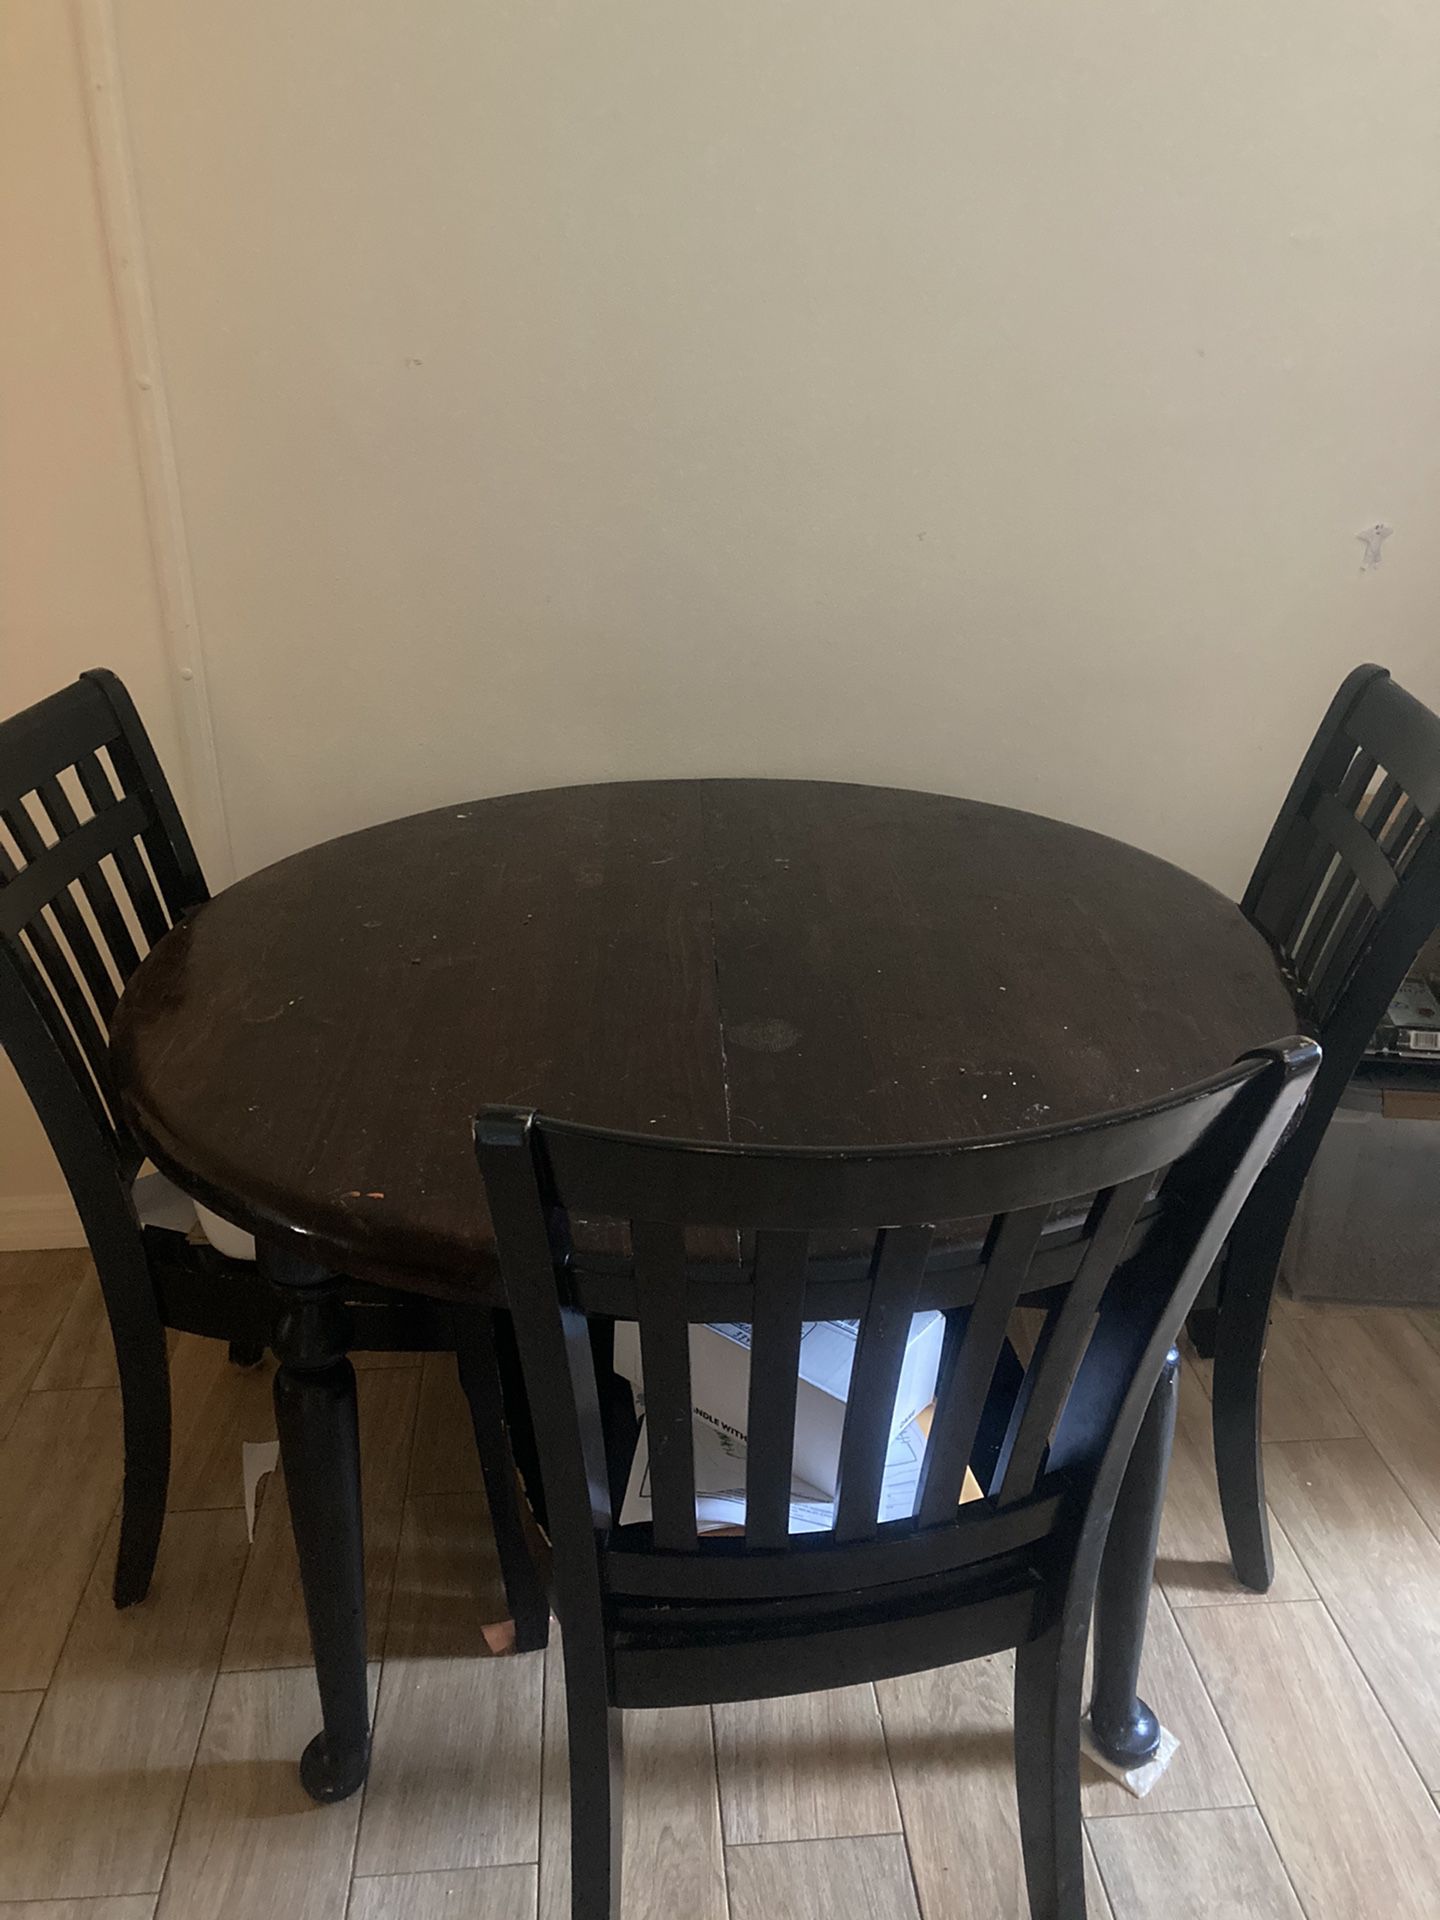 Solid wood table and chairs (leafs included)